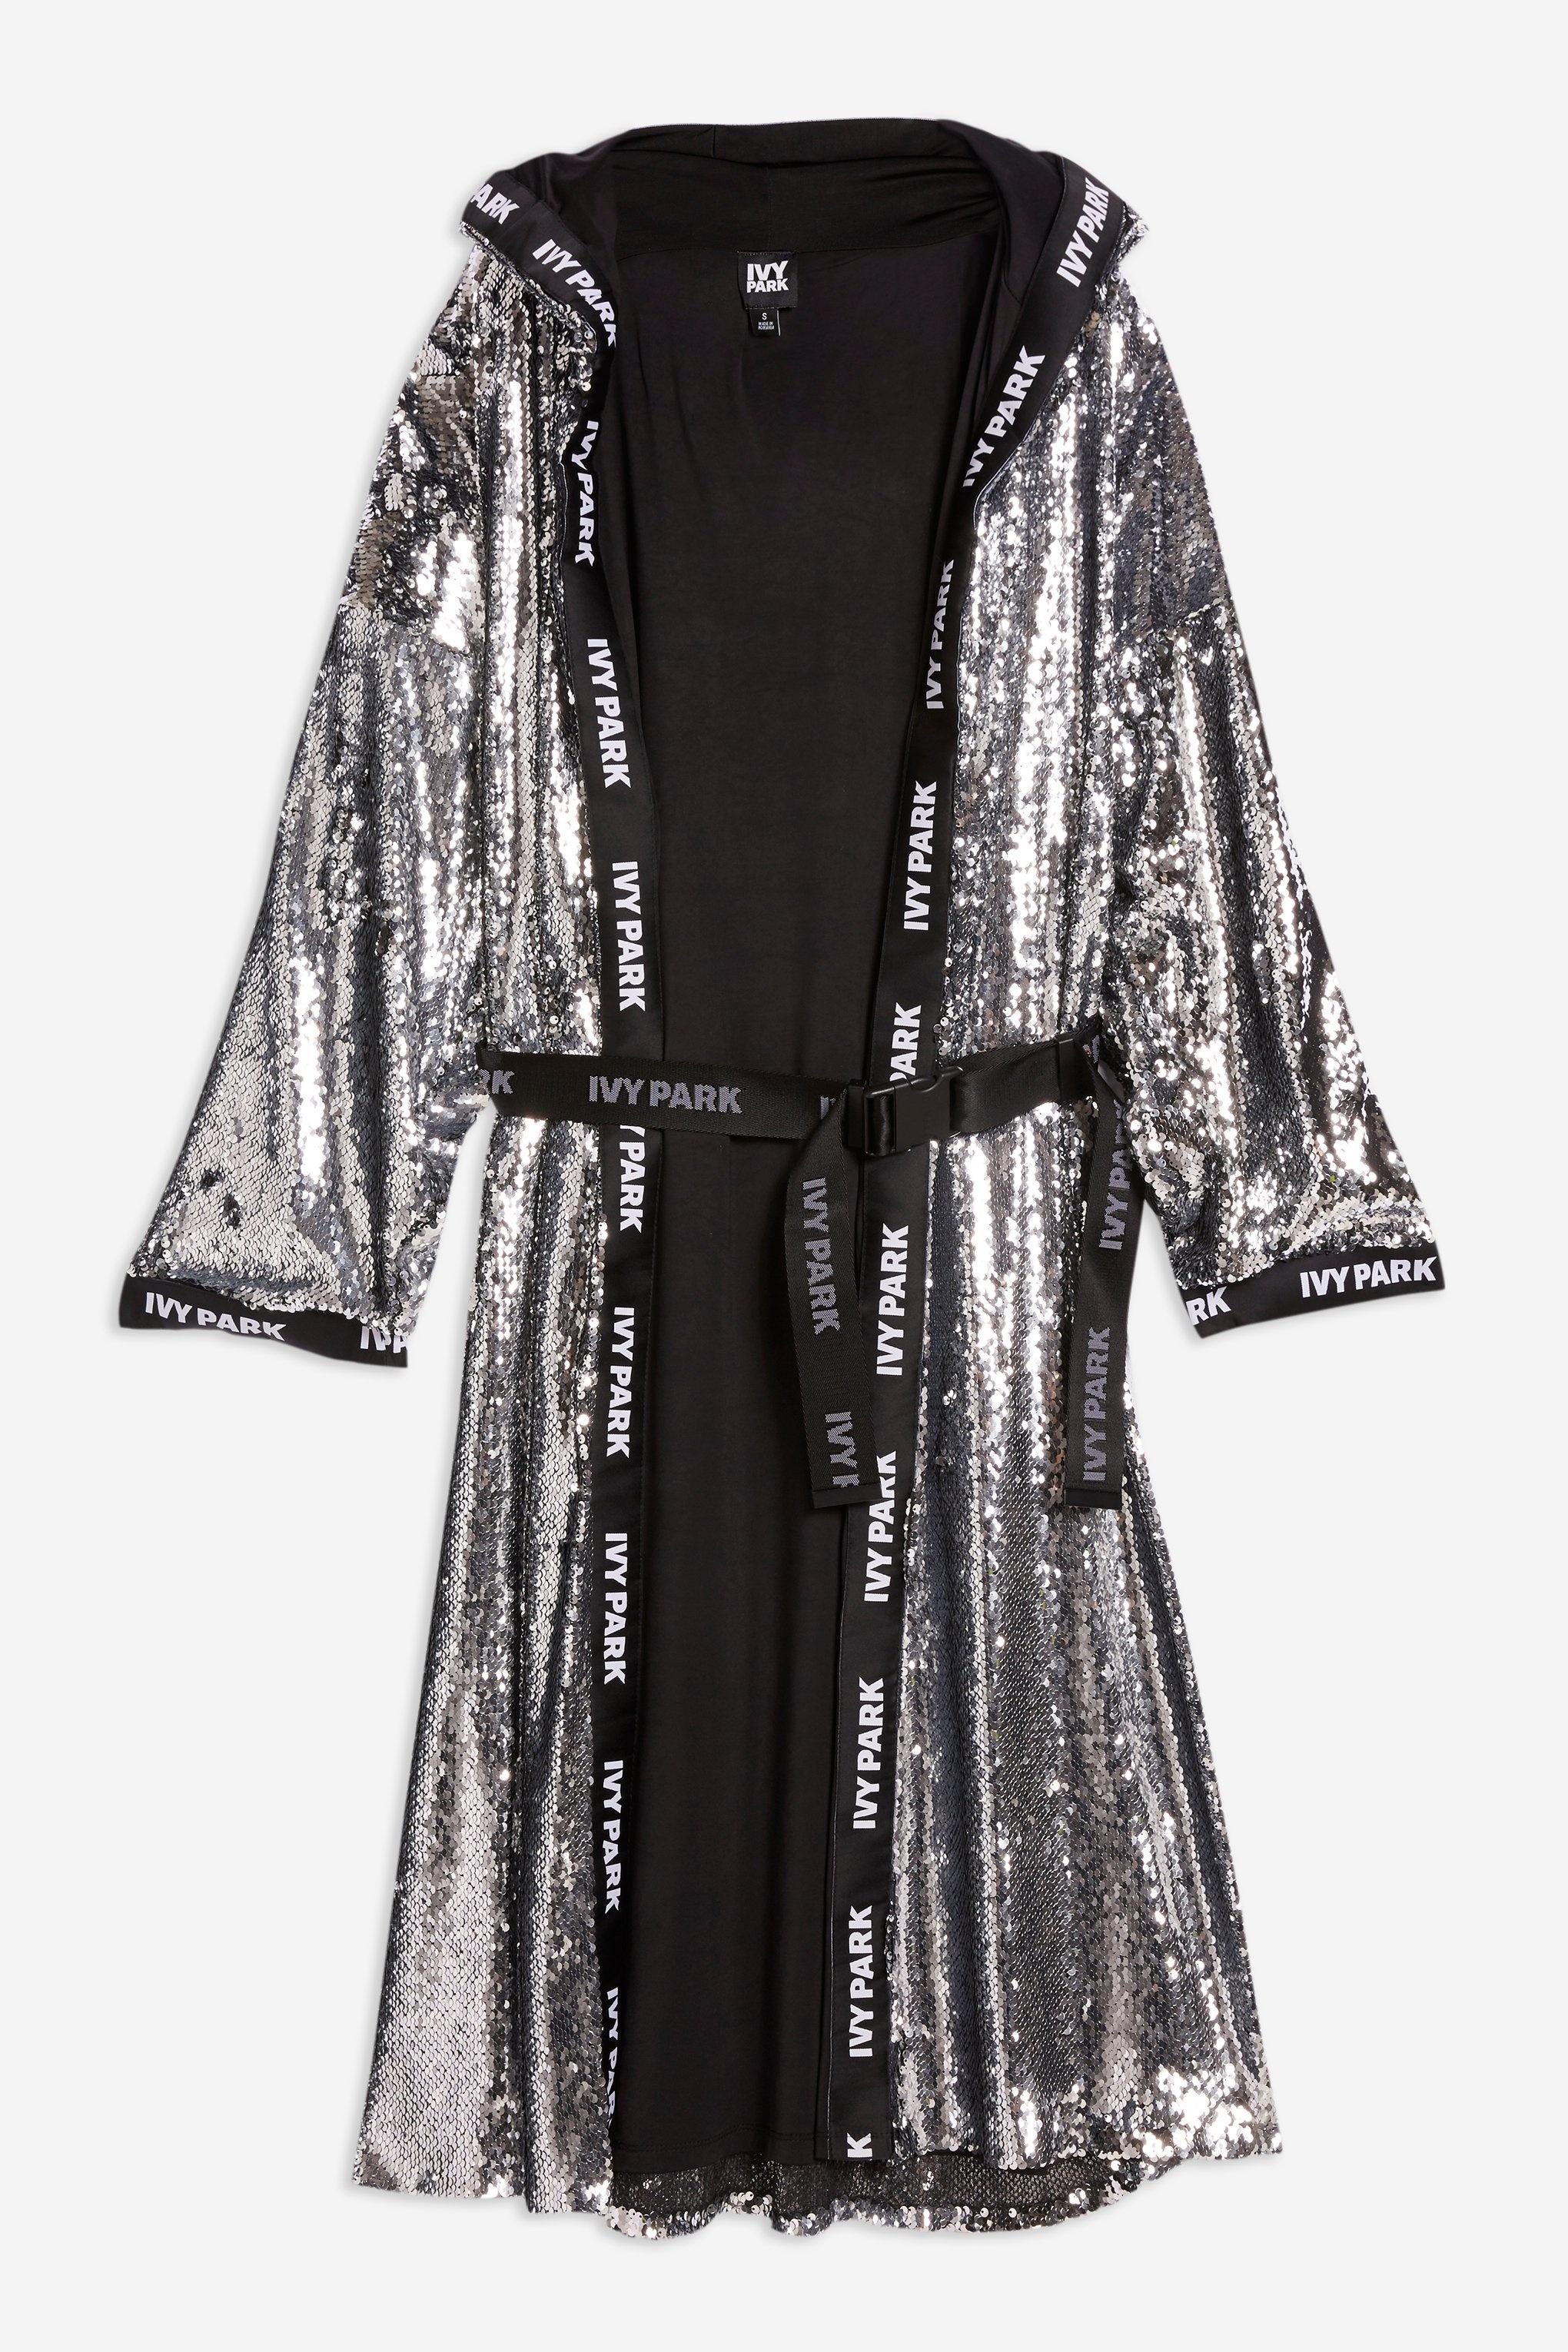 Ivy Park Synthetic Sequin Boxing Robe 